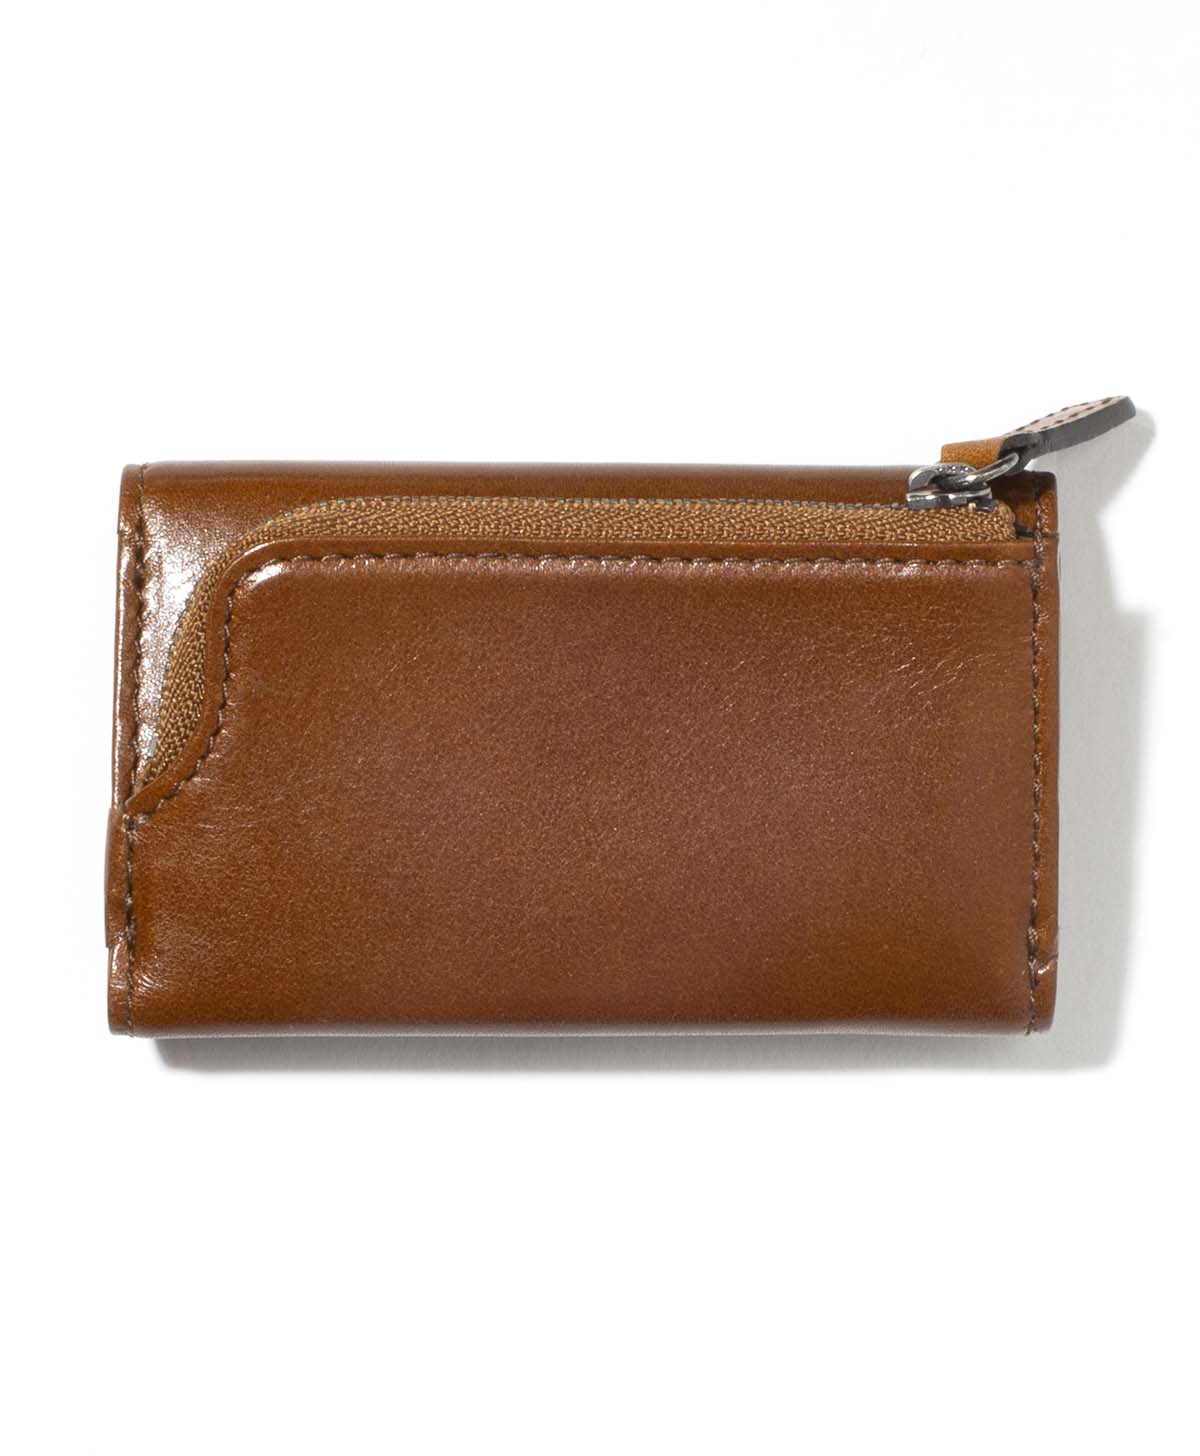 KEY CASE COMPACT WALLET / Brown